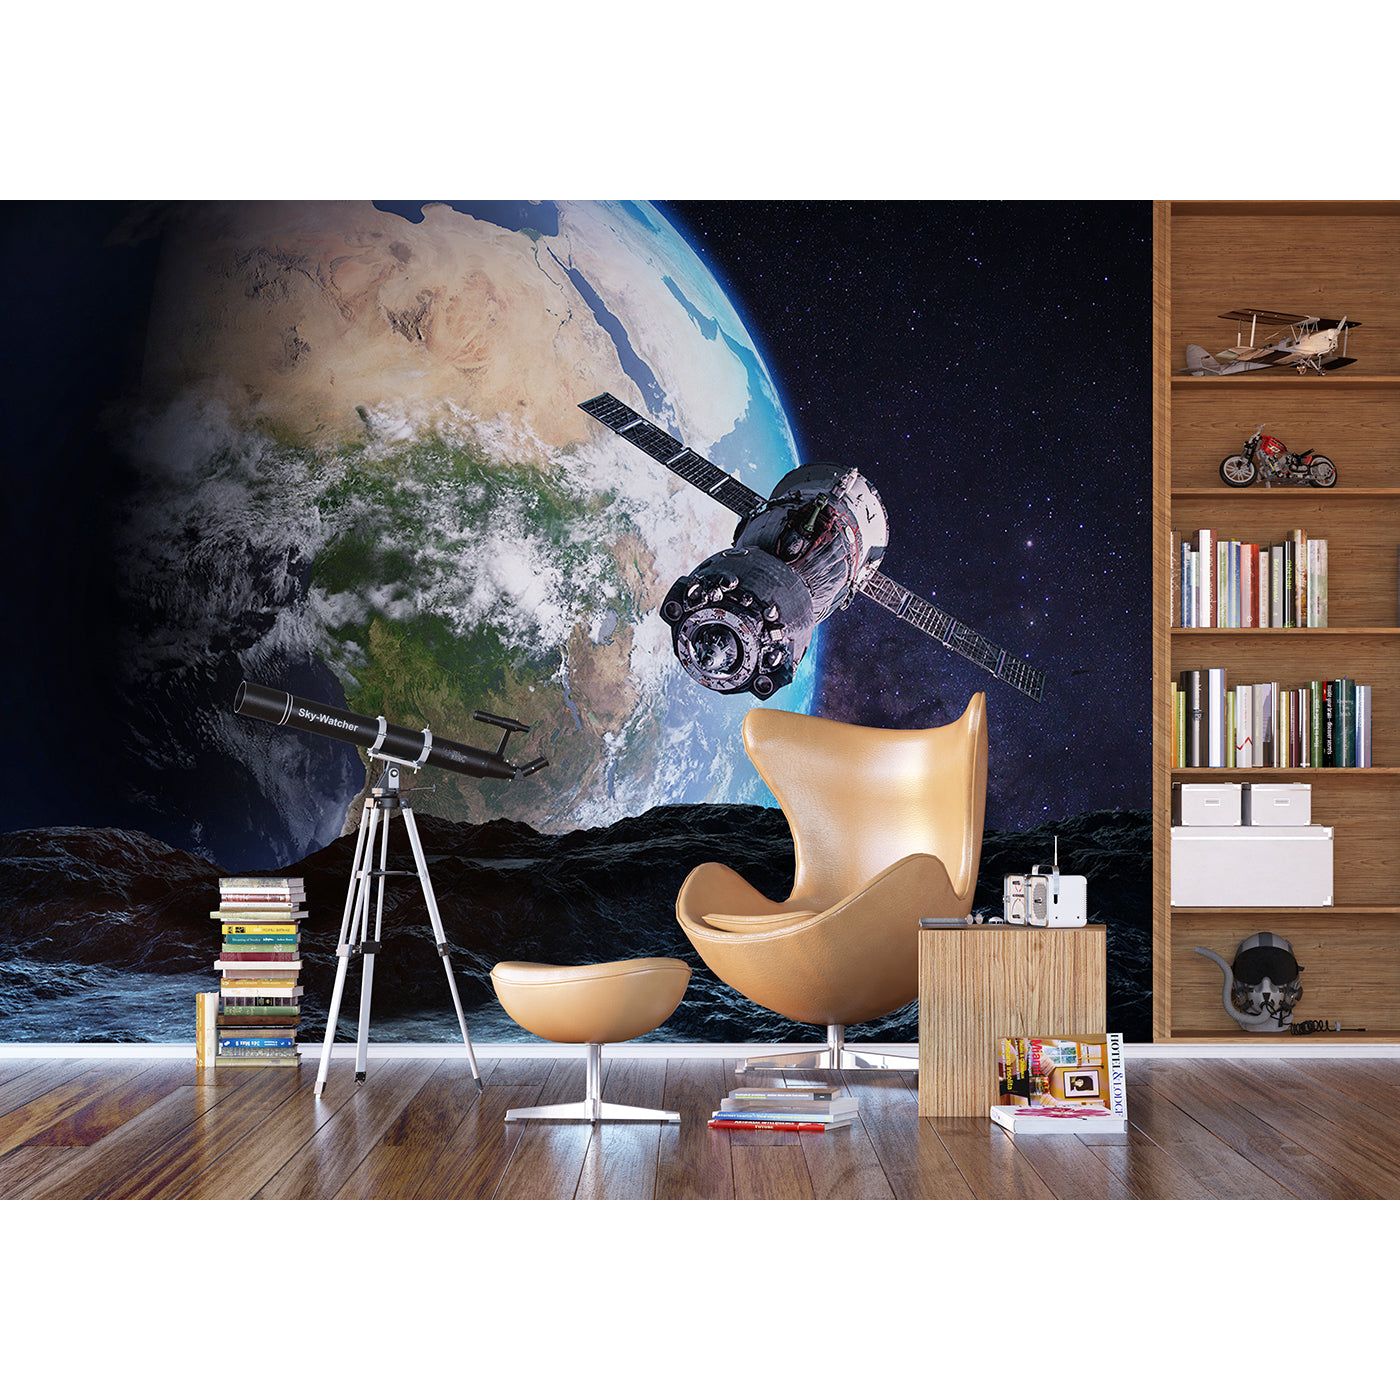 Cosmic Voyage: A Spacecraft's Journey Wall Mural